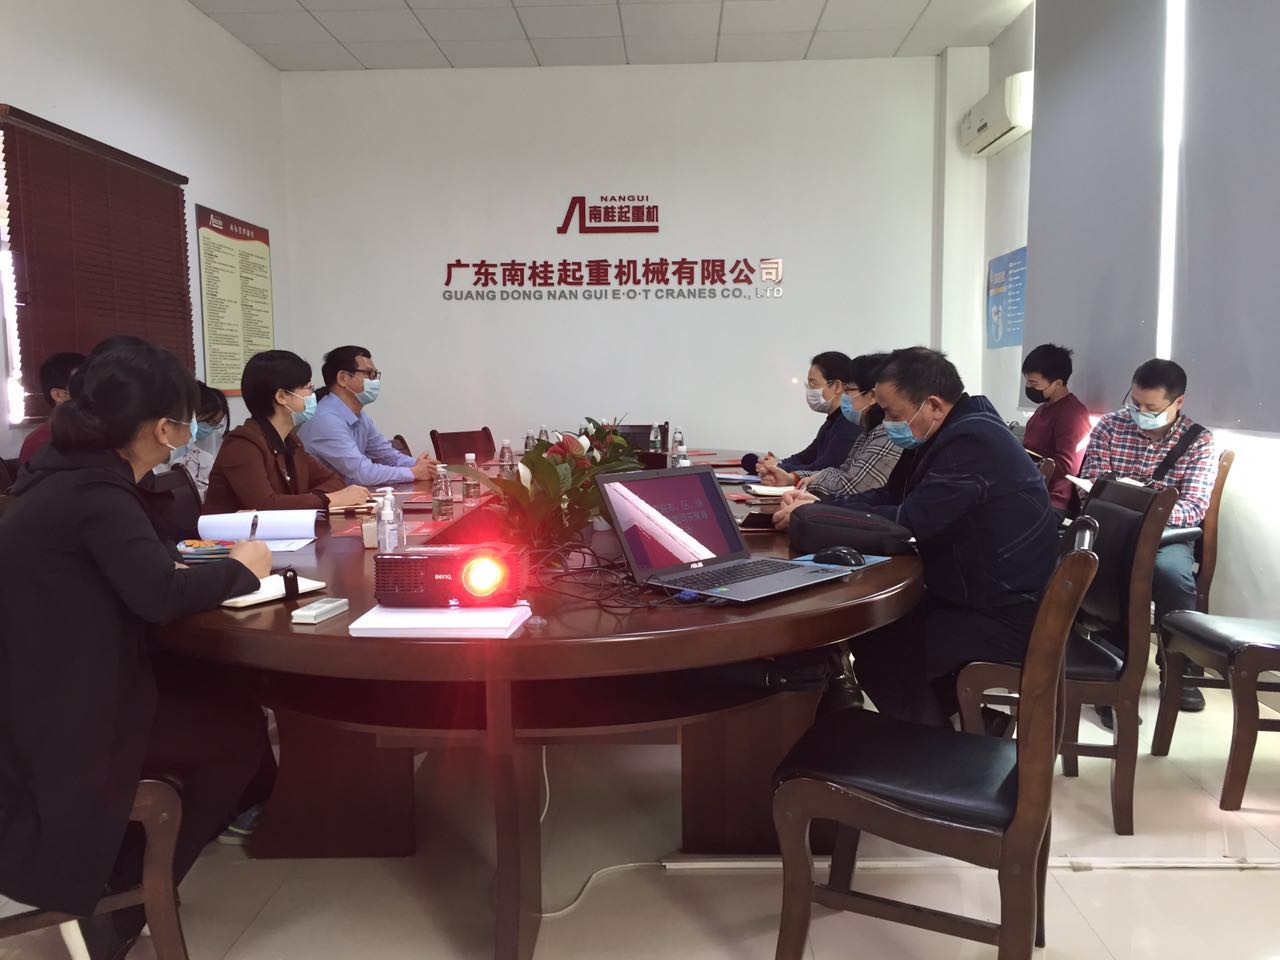 Foshan City's "Warm Spring Action for Enterprise Resumption of Work and Production in 2020"